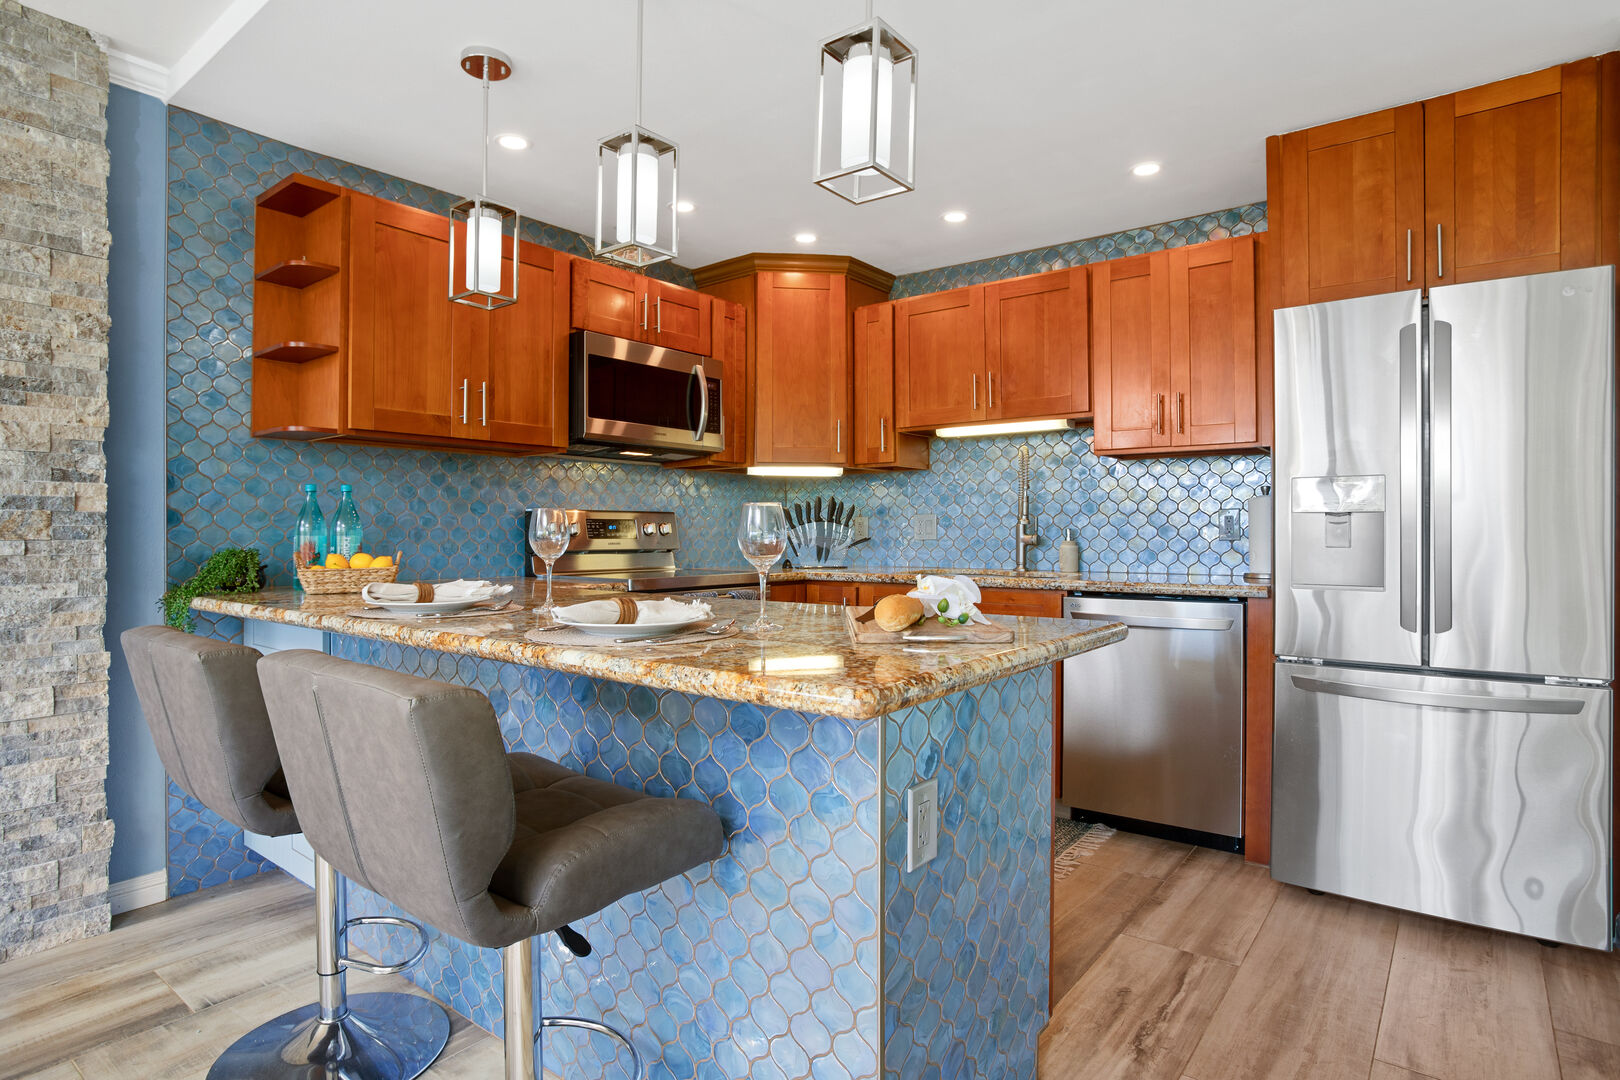 Fully equipped kitchen and countertop with 2 cozy barstools!